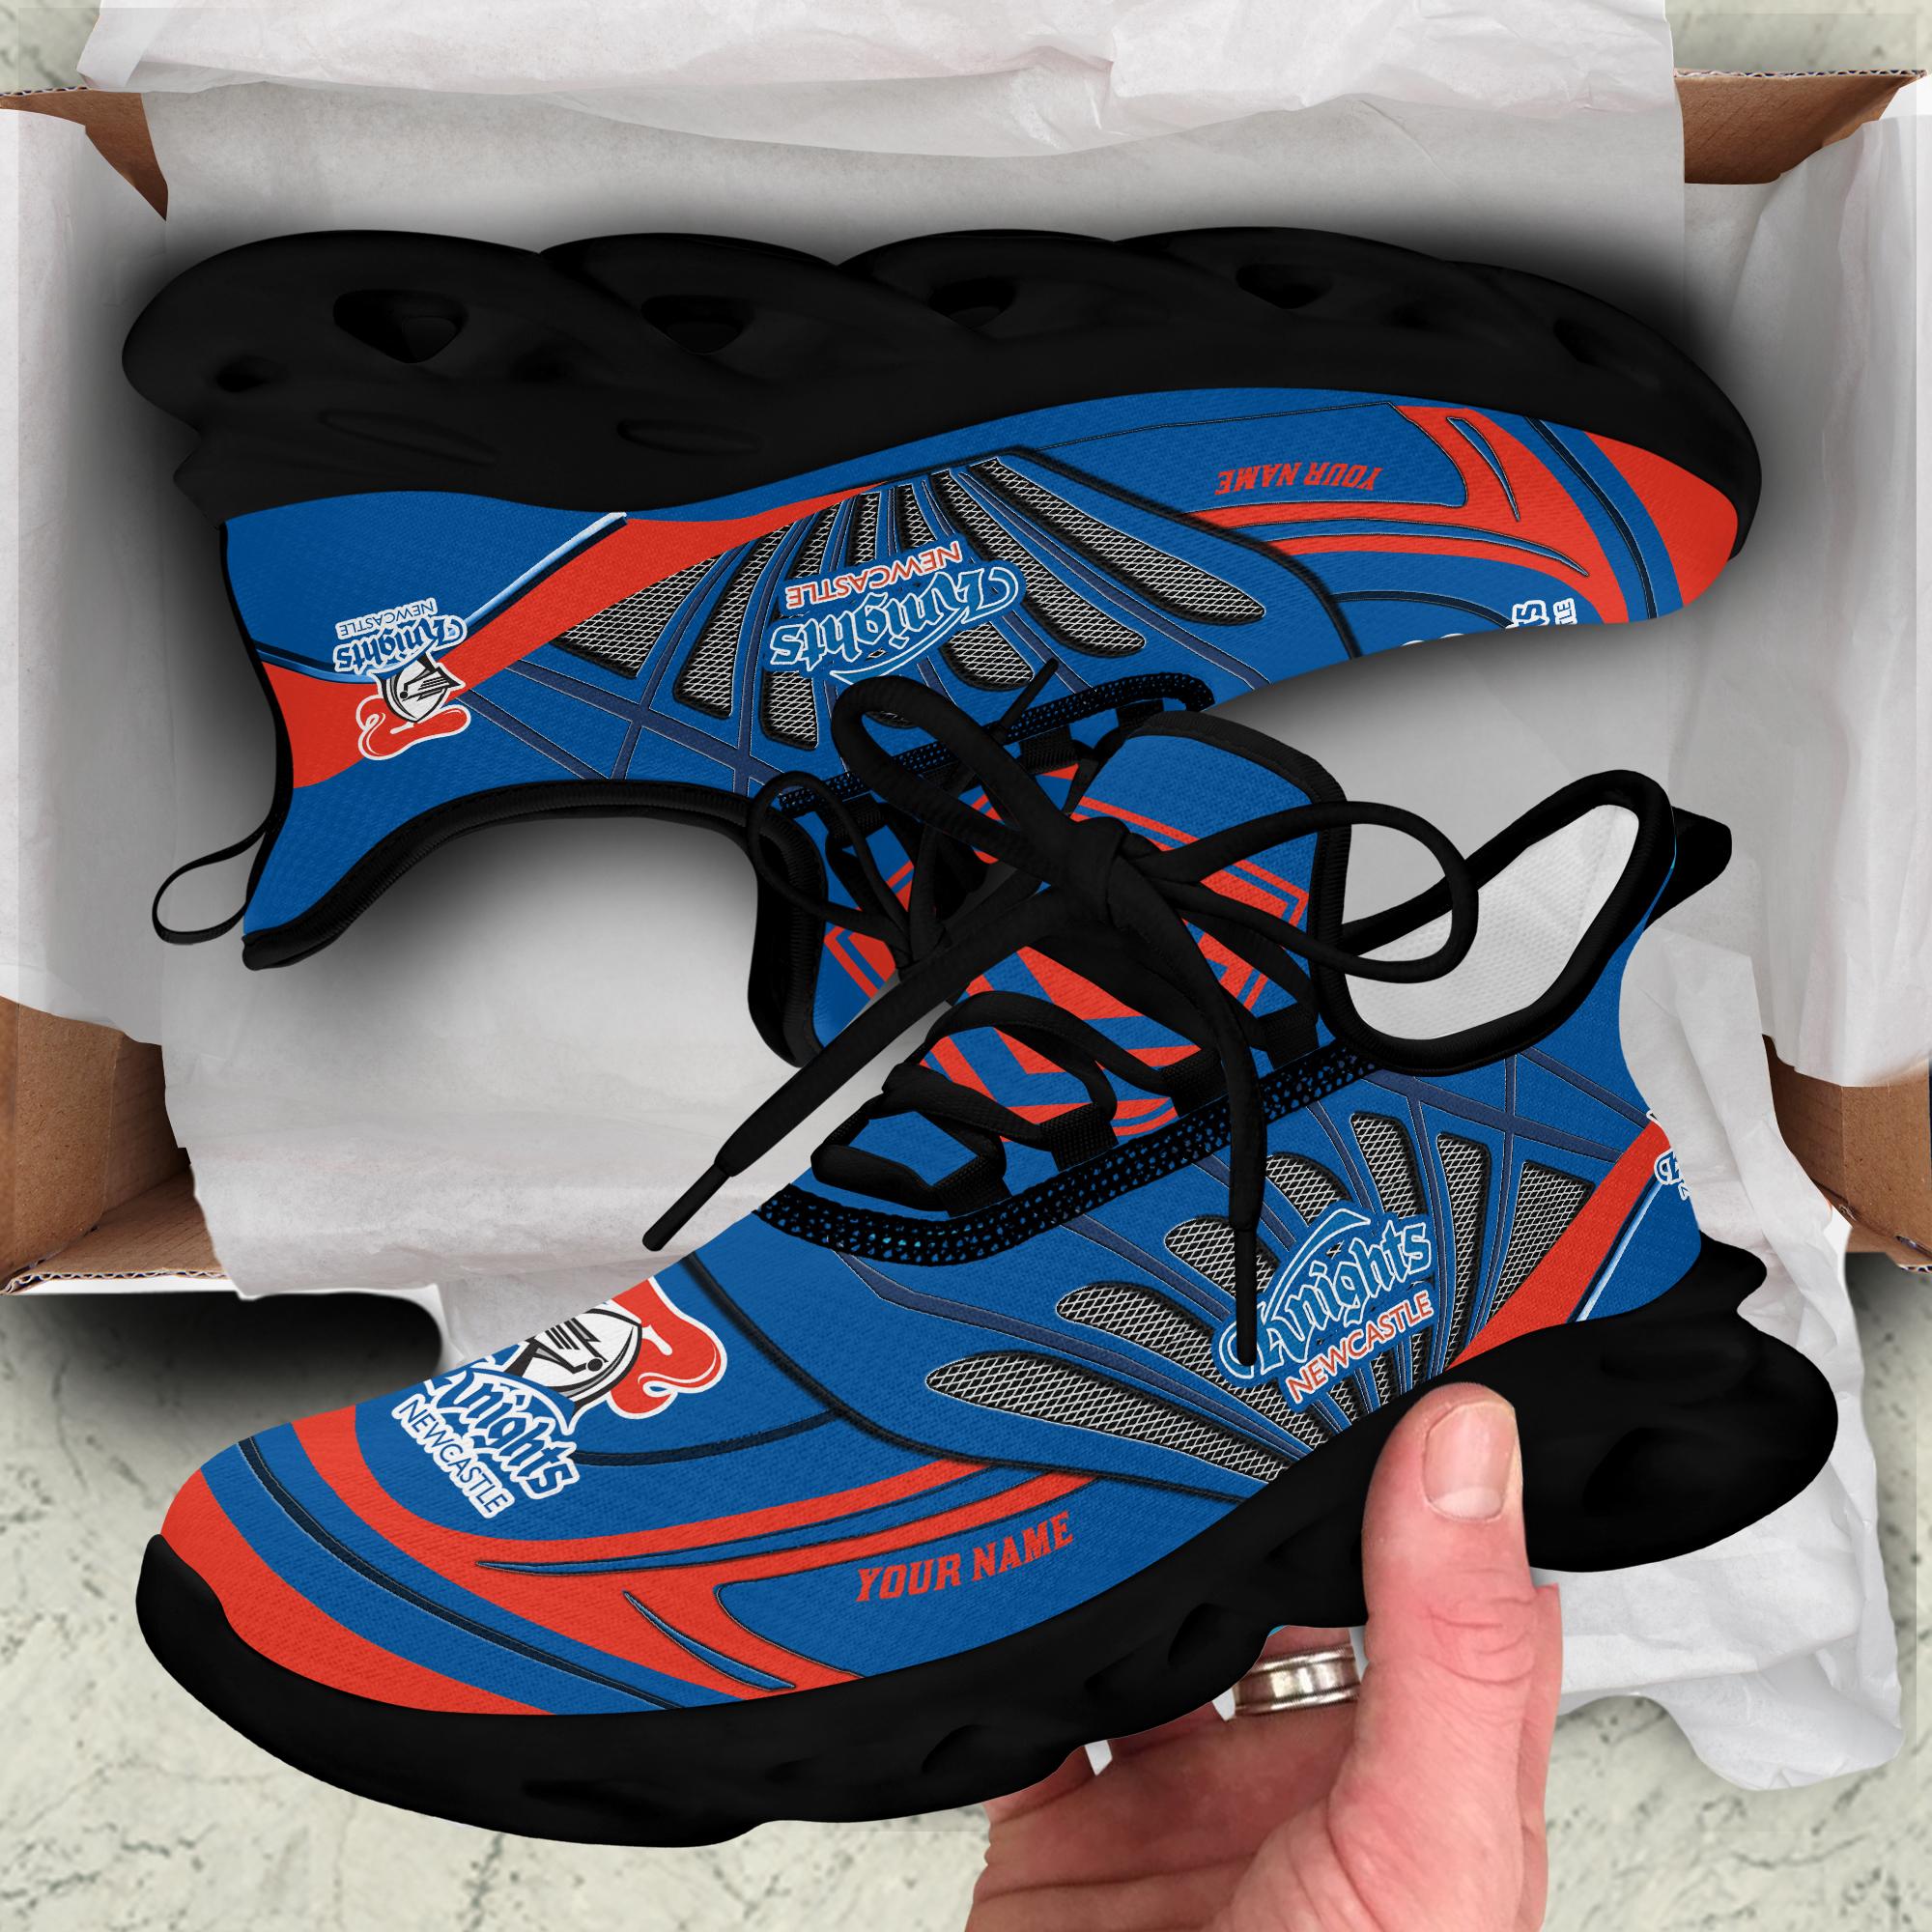 Newcastle Knights NRL Custom Name Clunky Max Soul Shoes